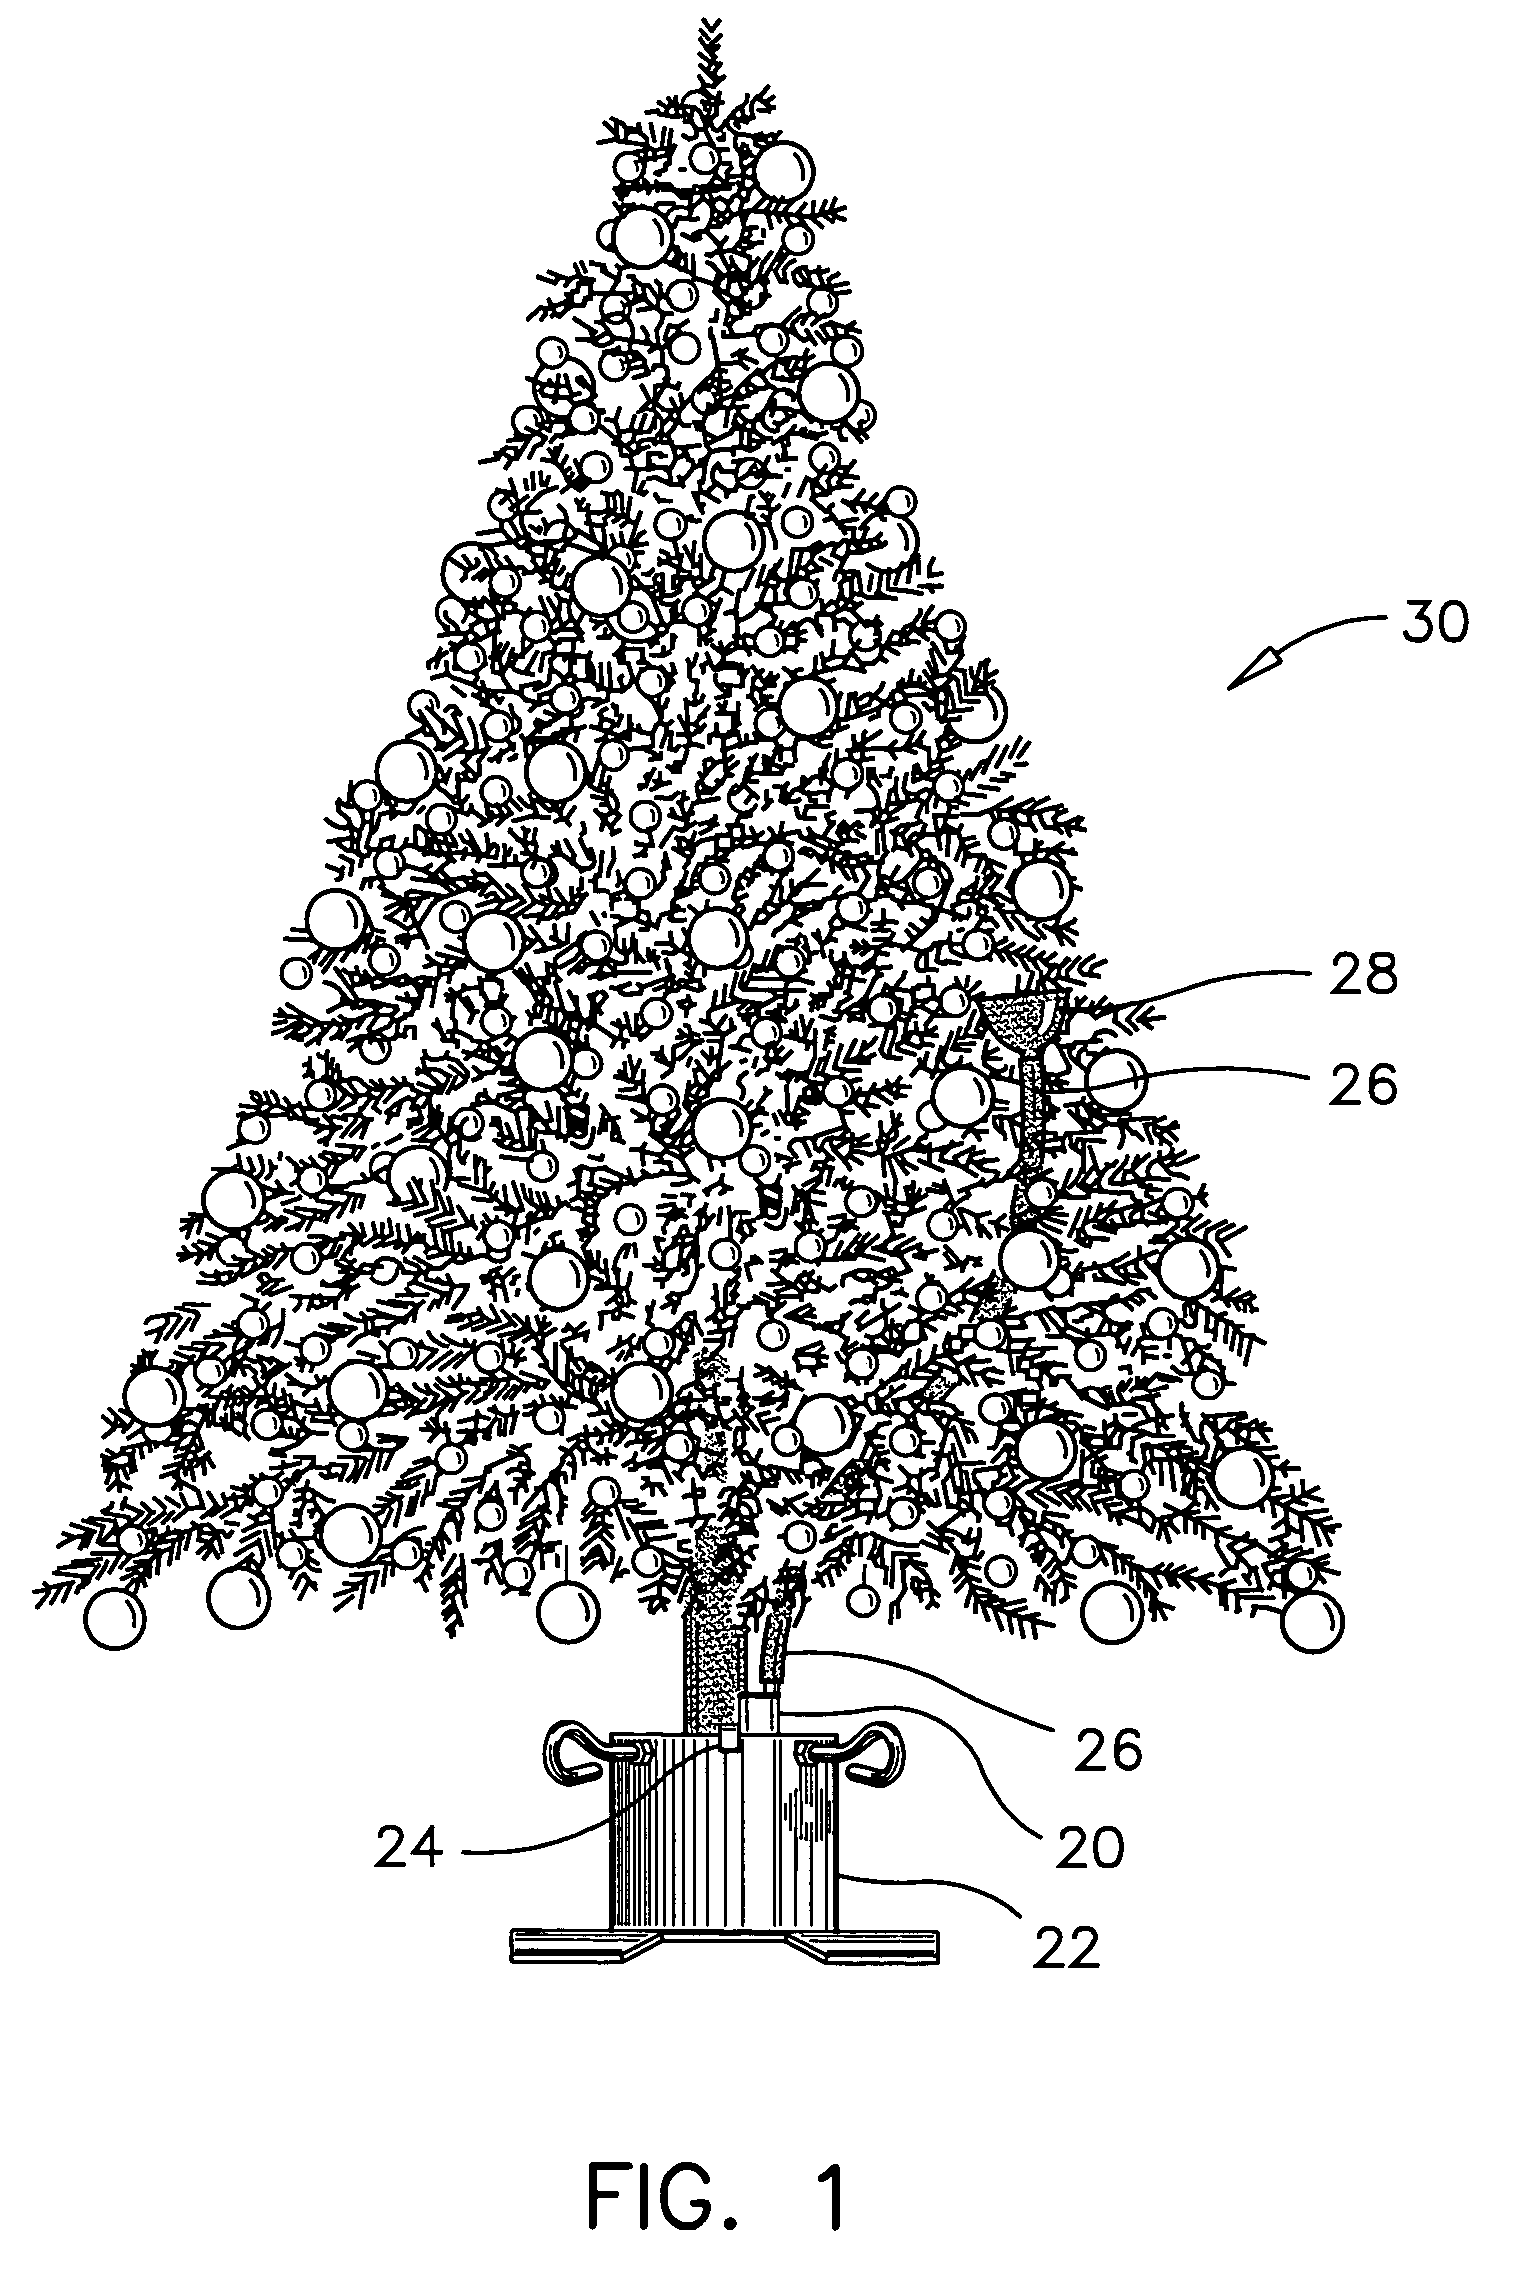 Float valve for a christmas tree watering system